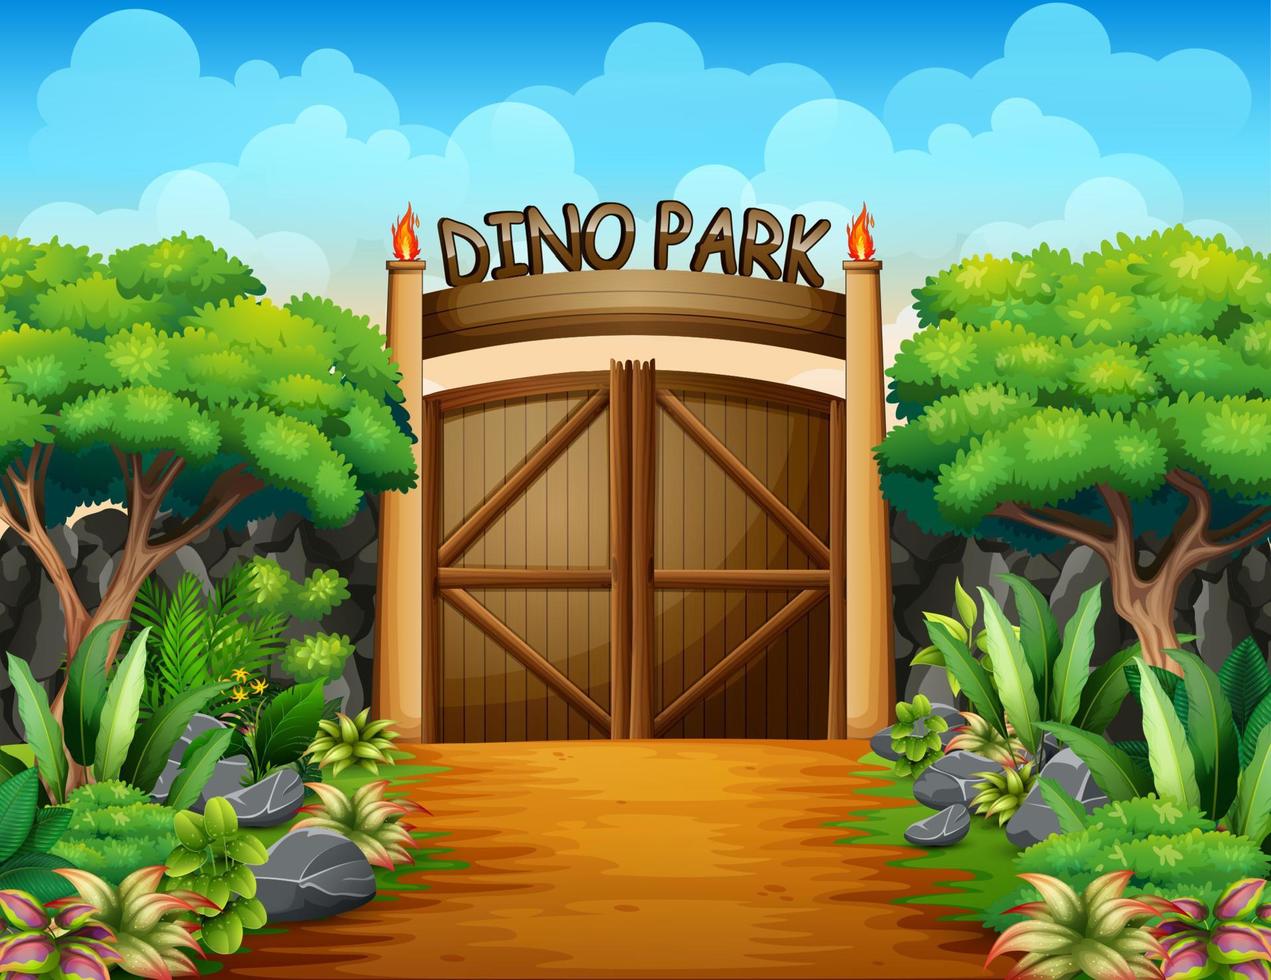 The big gate of dino park background vector